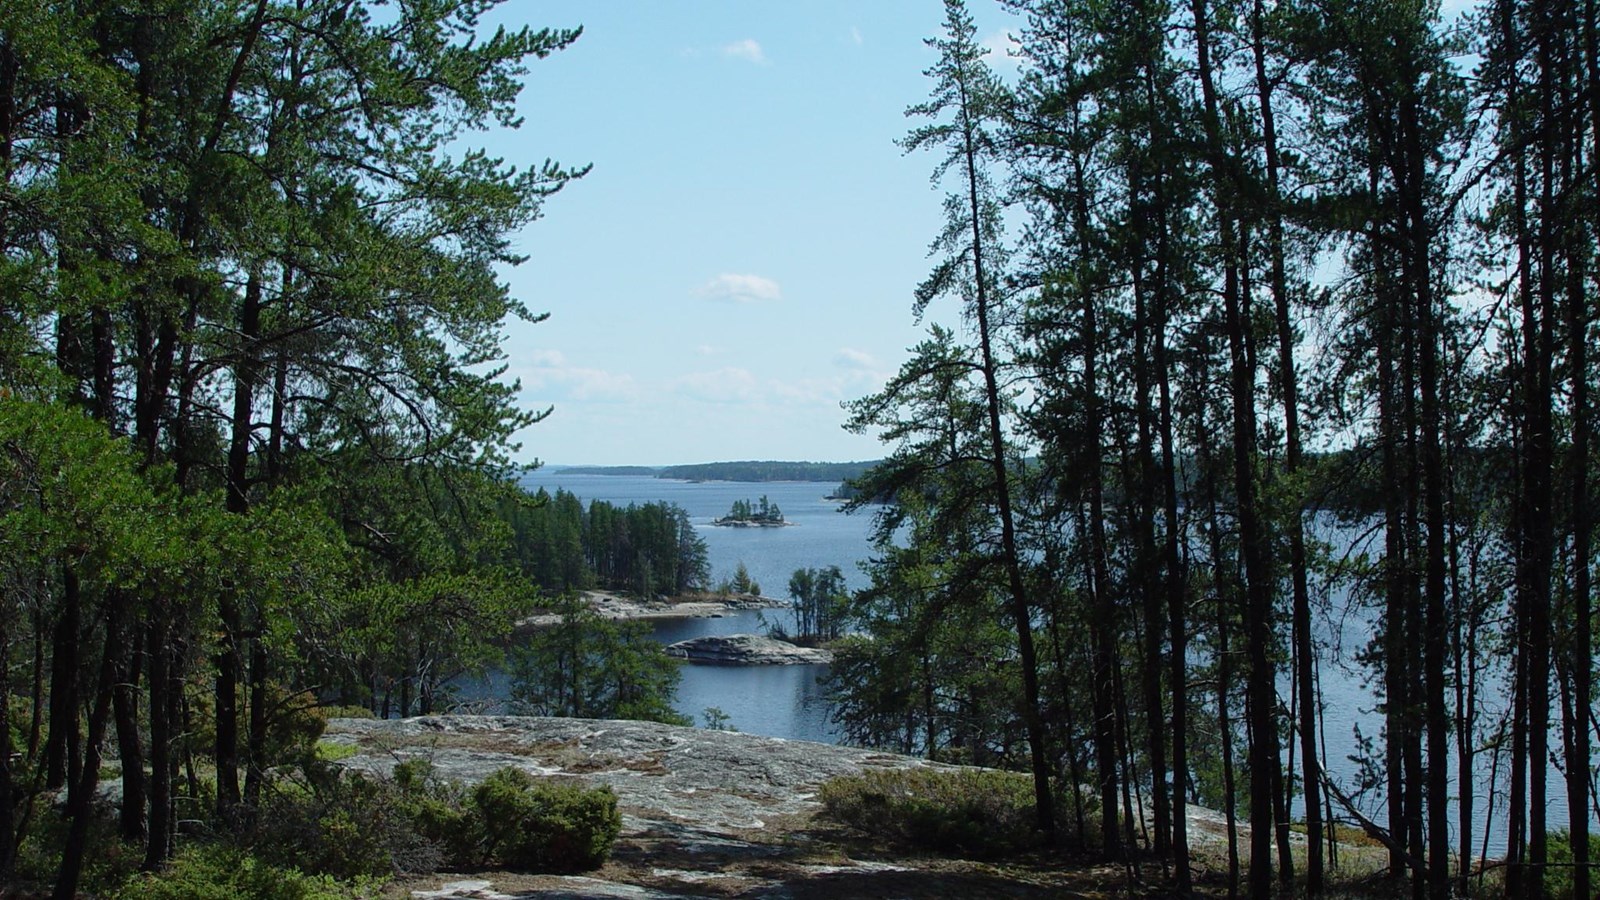 A view from a rocky out cropping of a lake with islands scattered throughout.